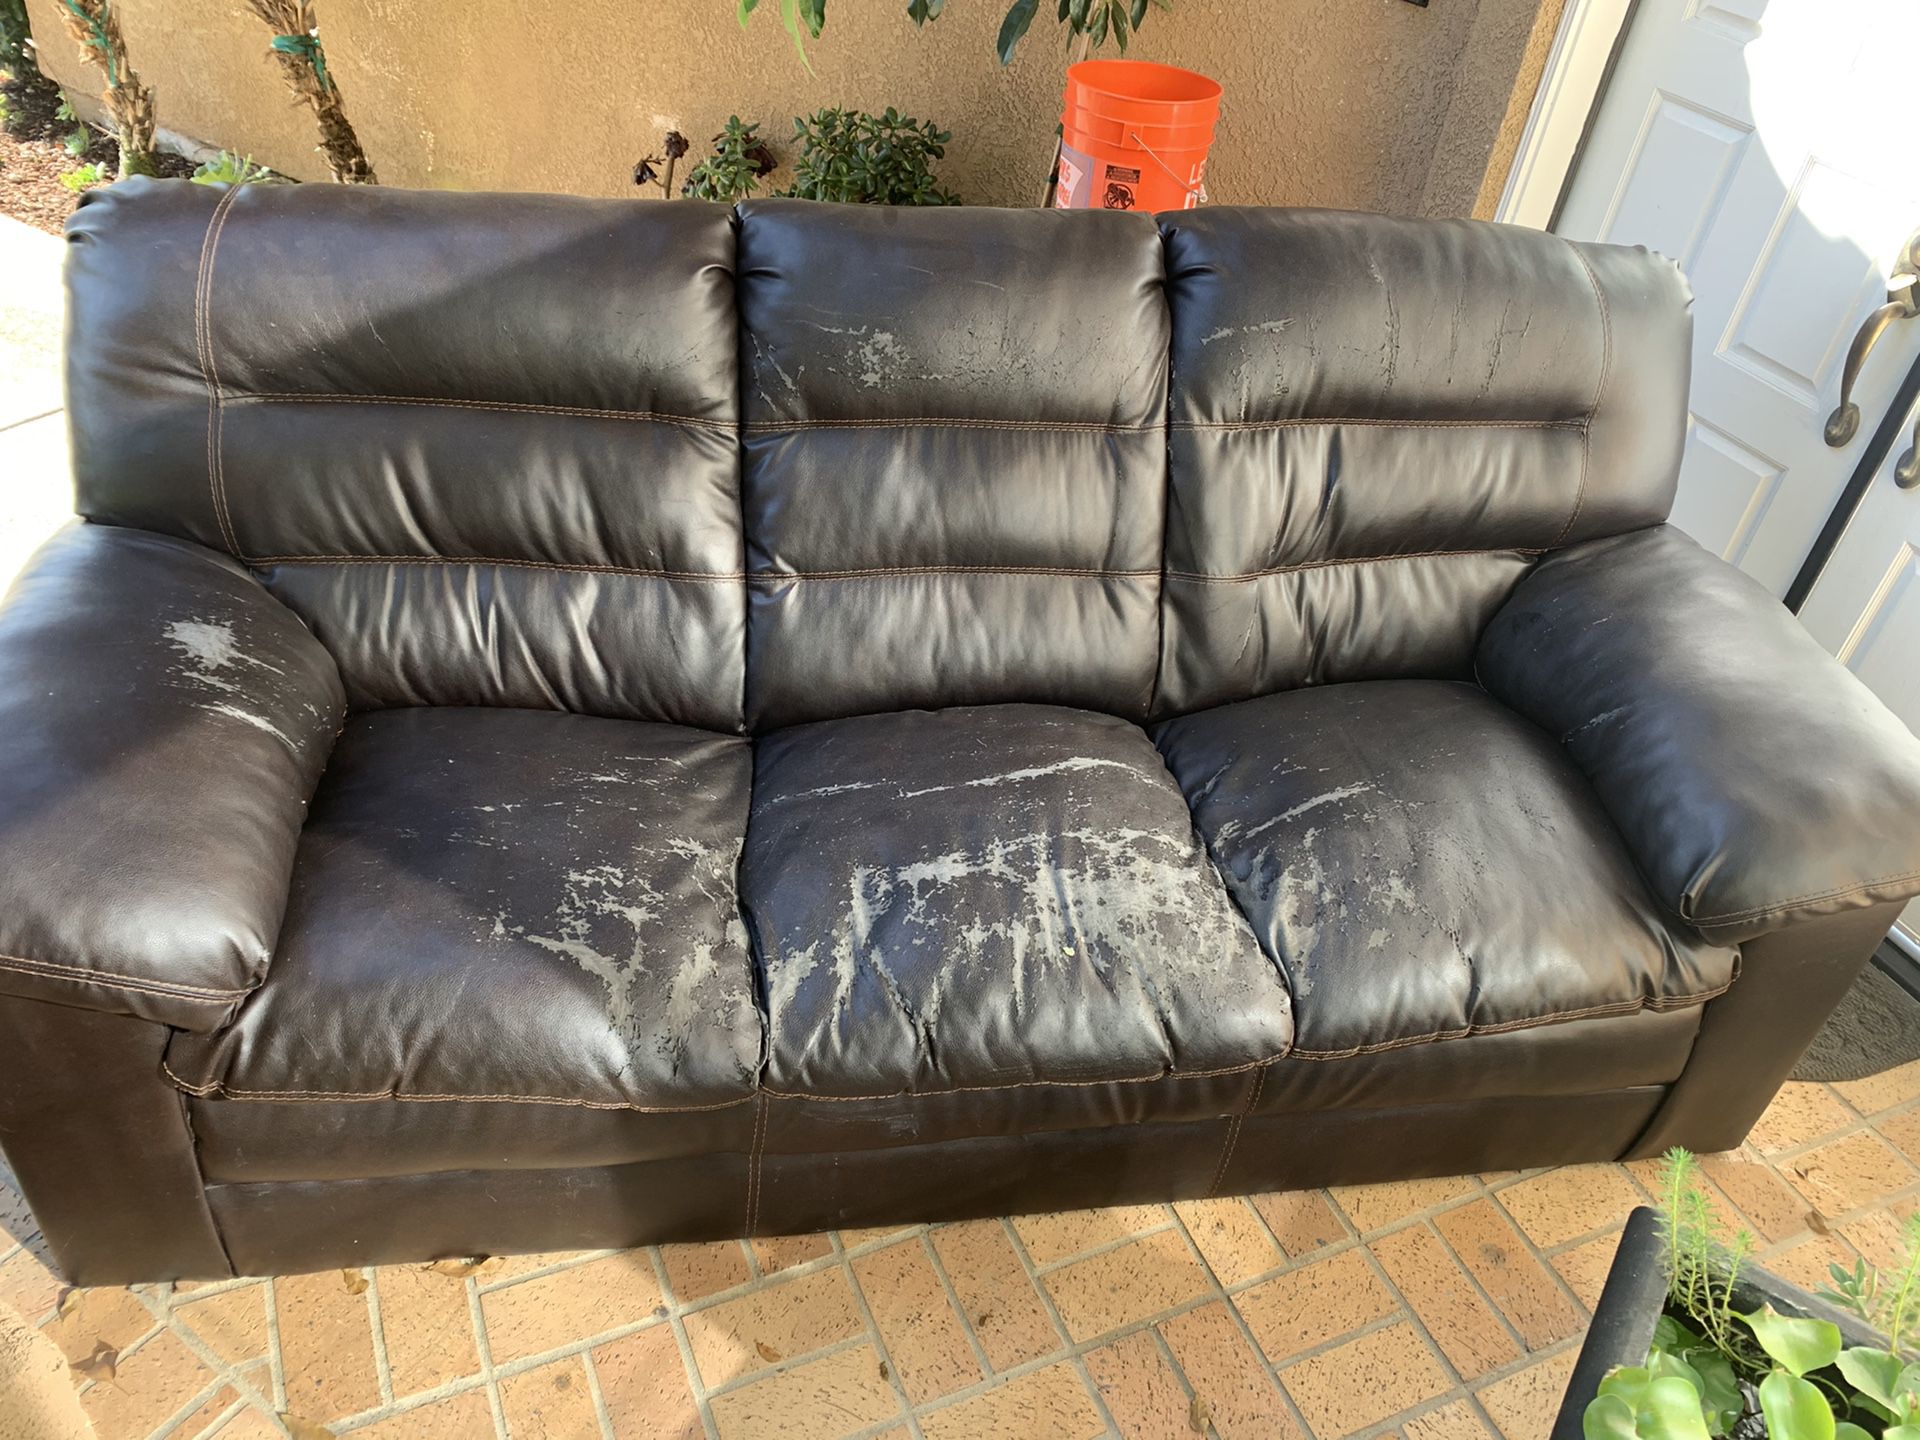 Free faux leather couch. Just needs slip cover.